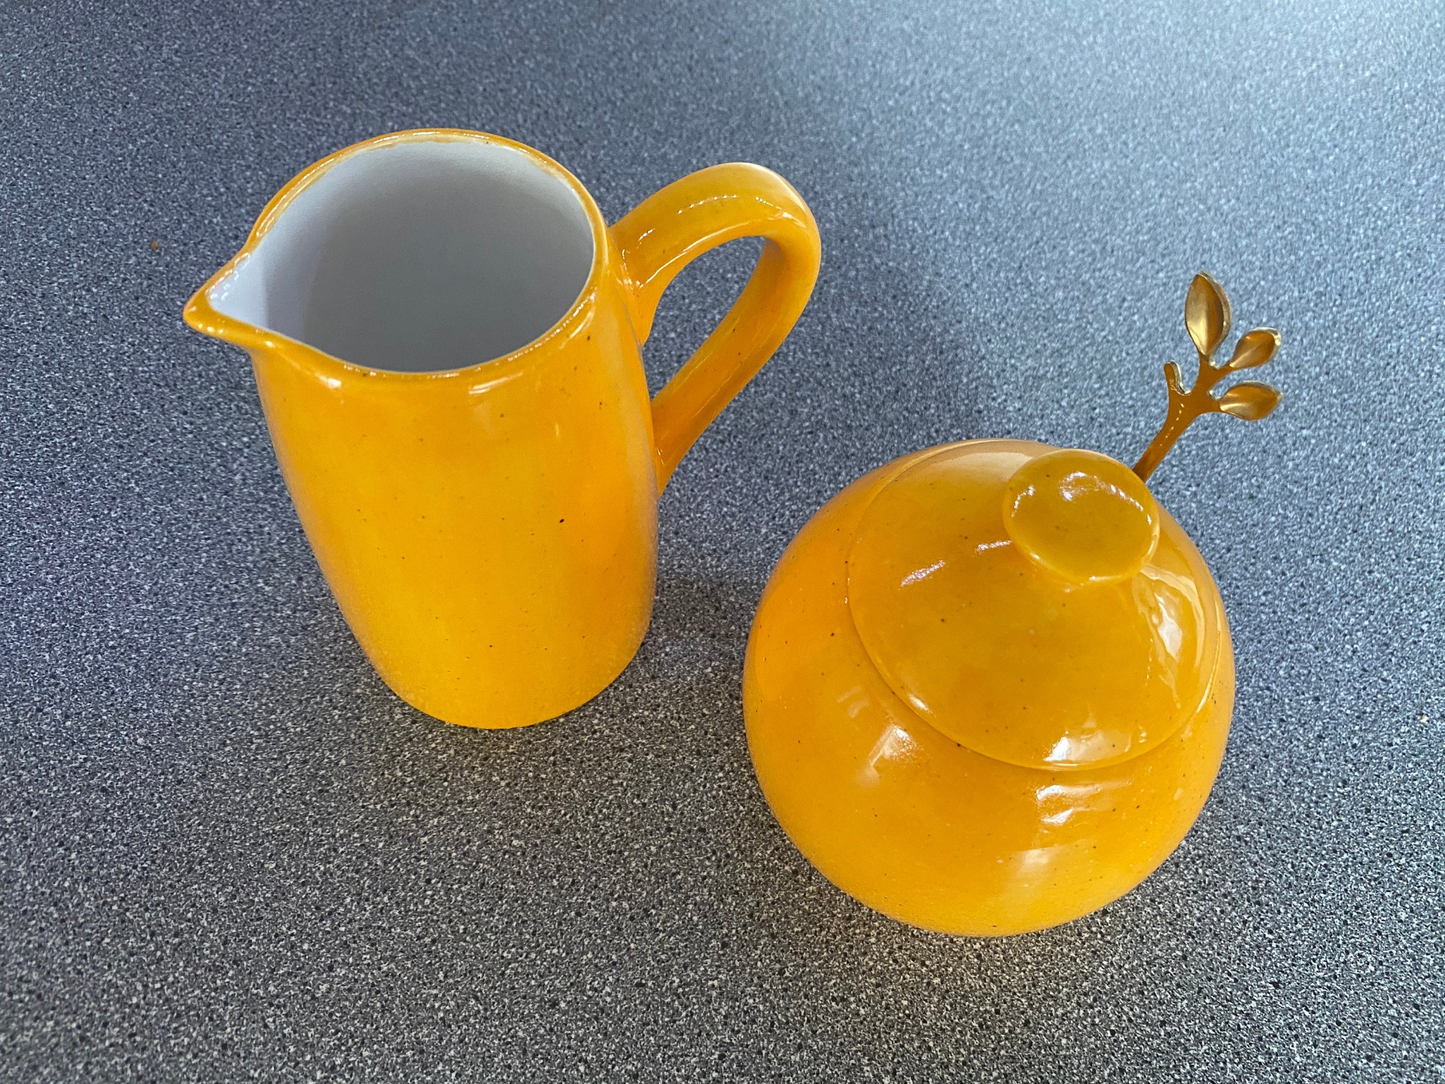 Butter Dish, Sugar Bowl and Milk Jug Set - Speckled Yellow